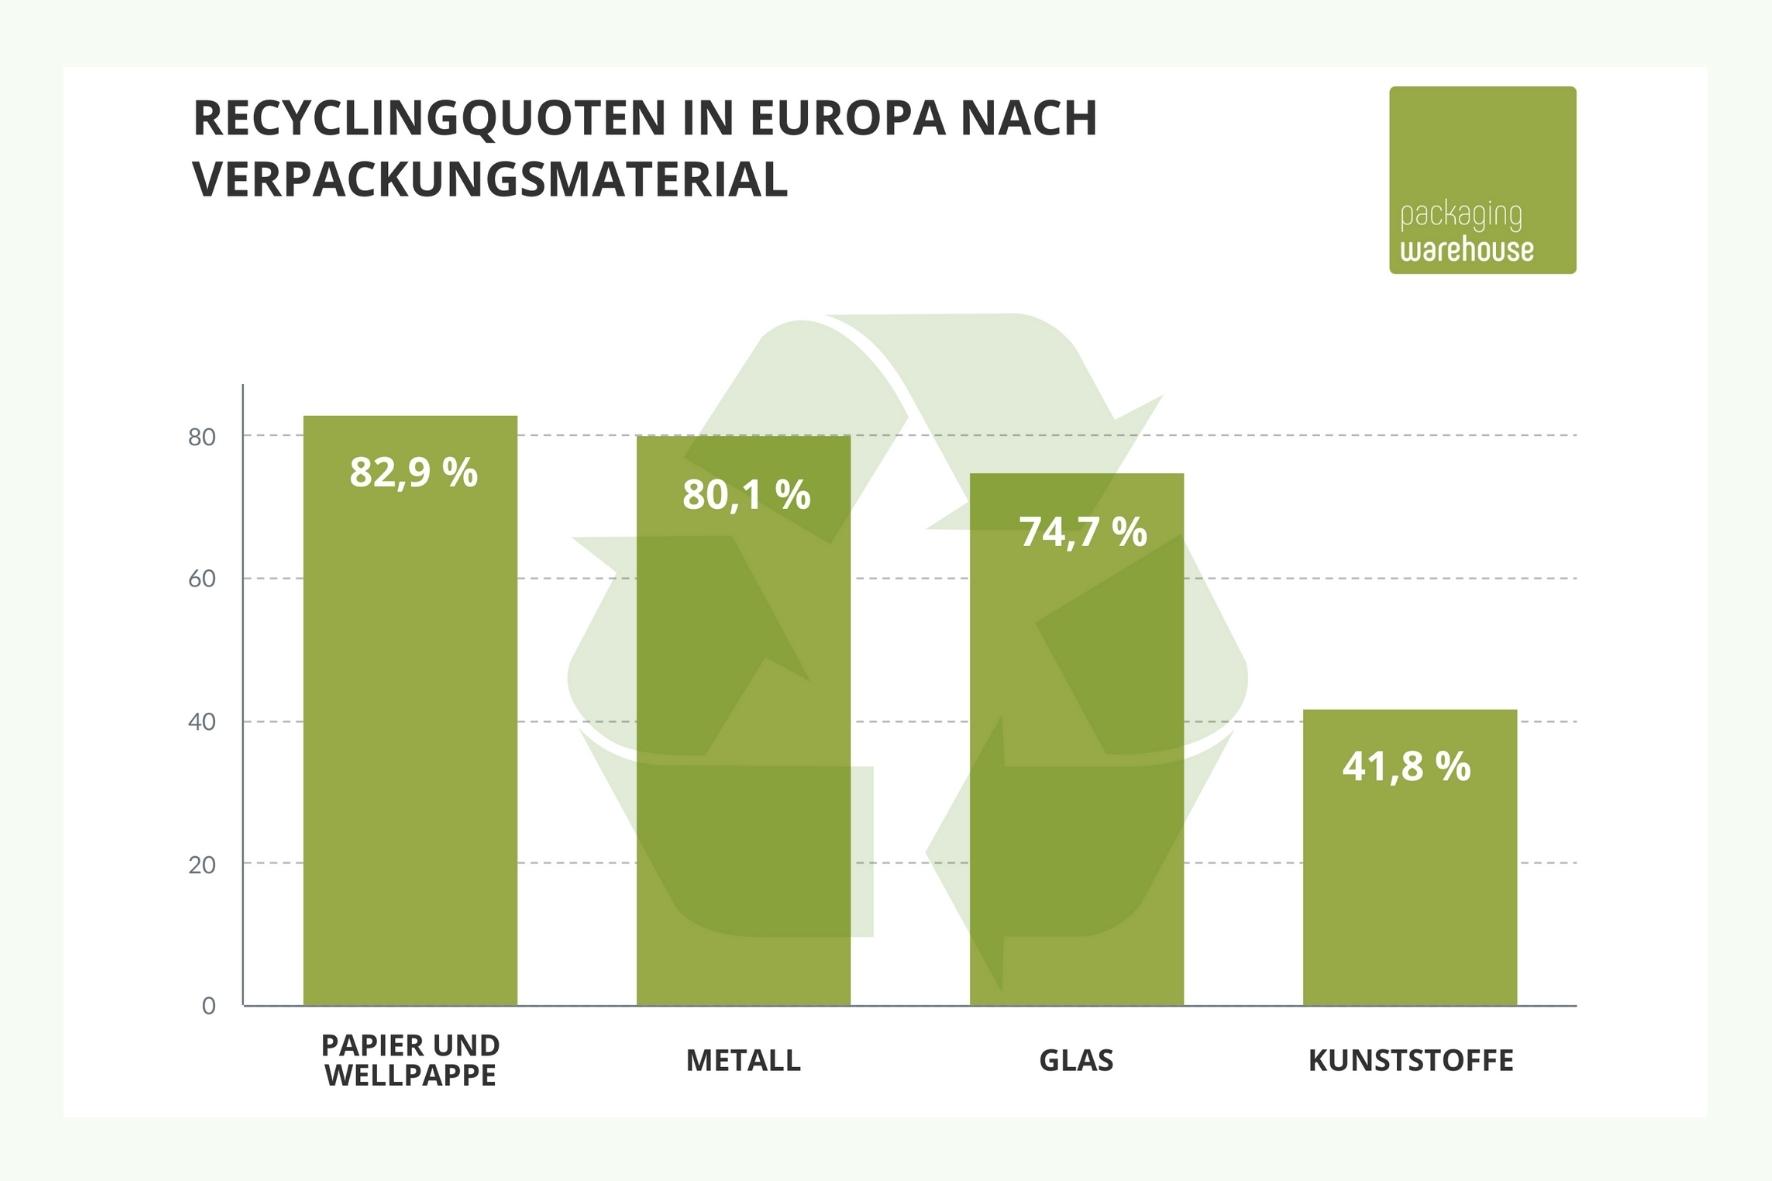 Recyclingquote laut Fefco in Europa